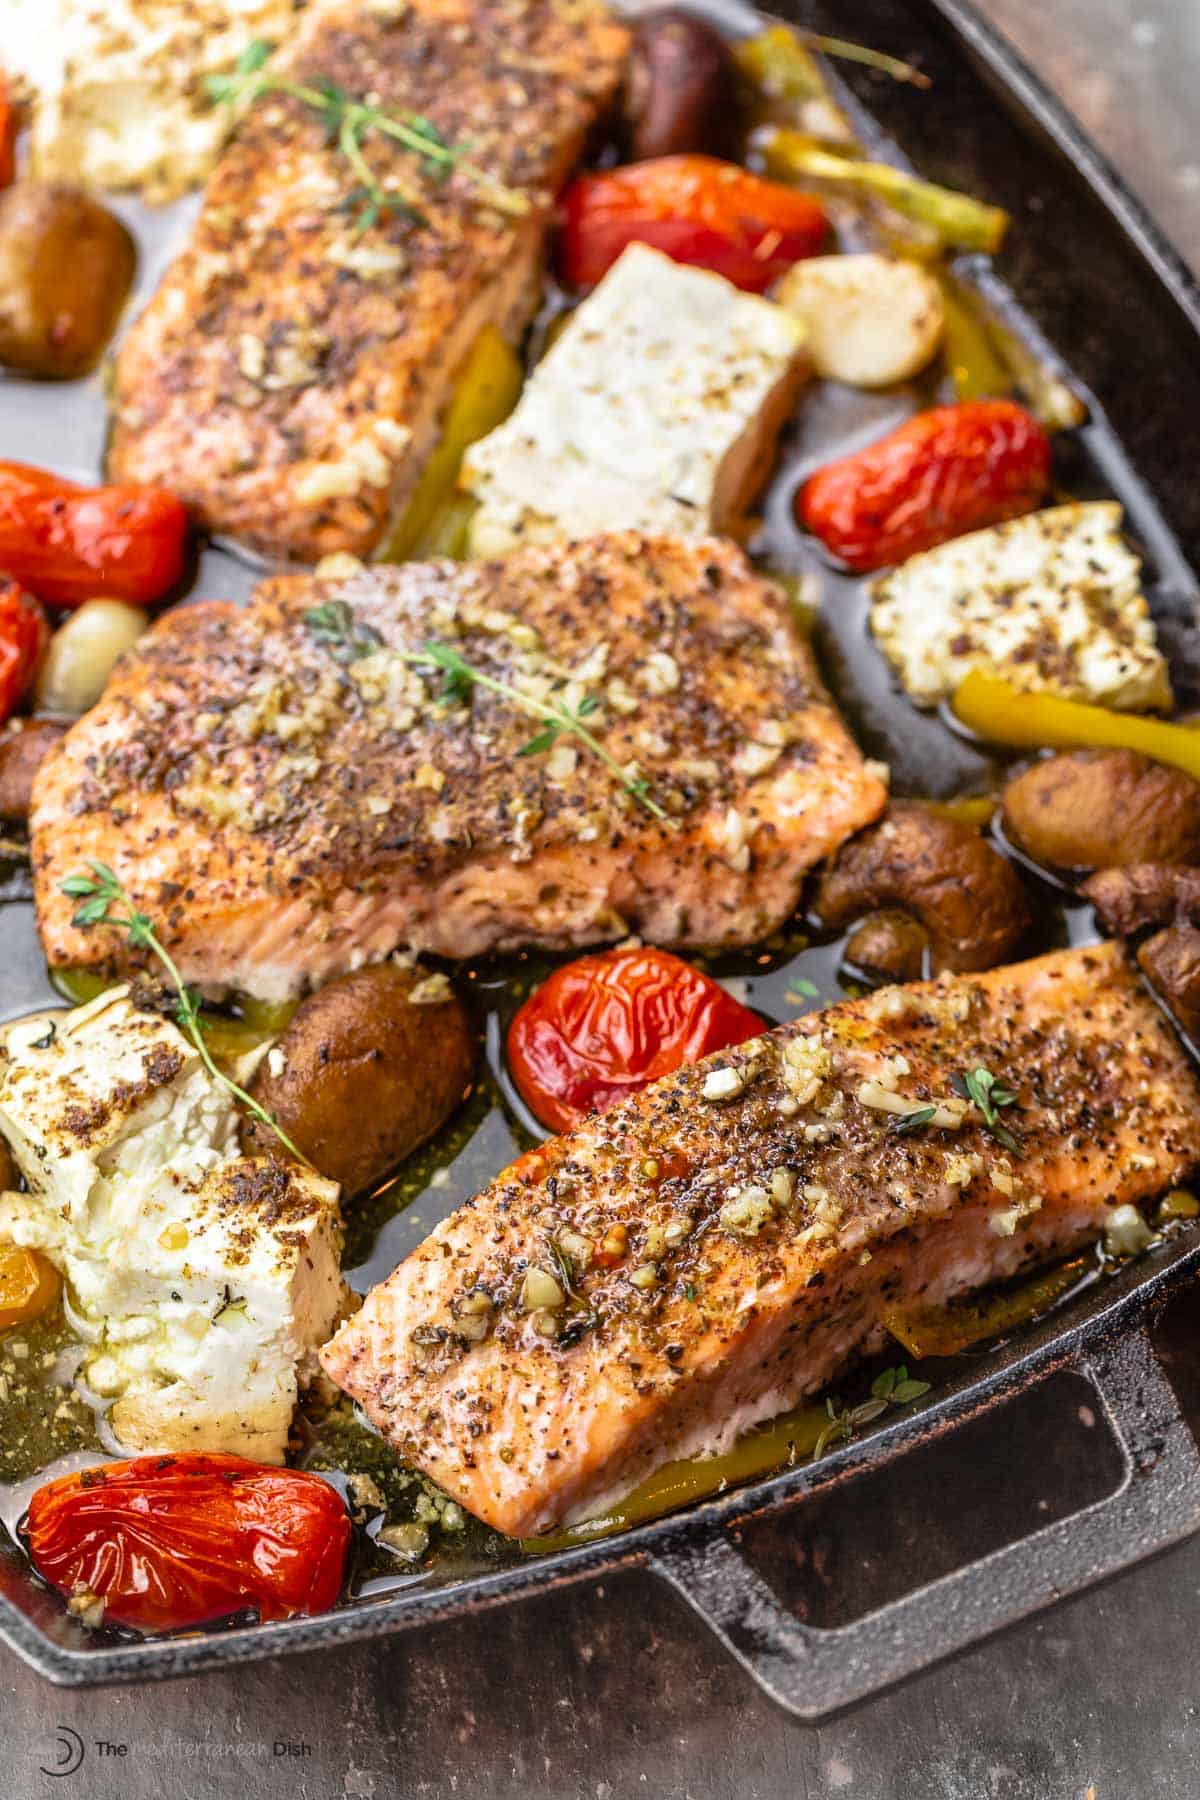 baked salmon fillet with mushrooms, feta, cherry tomatoes, garlic, and bell peppers